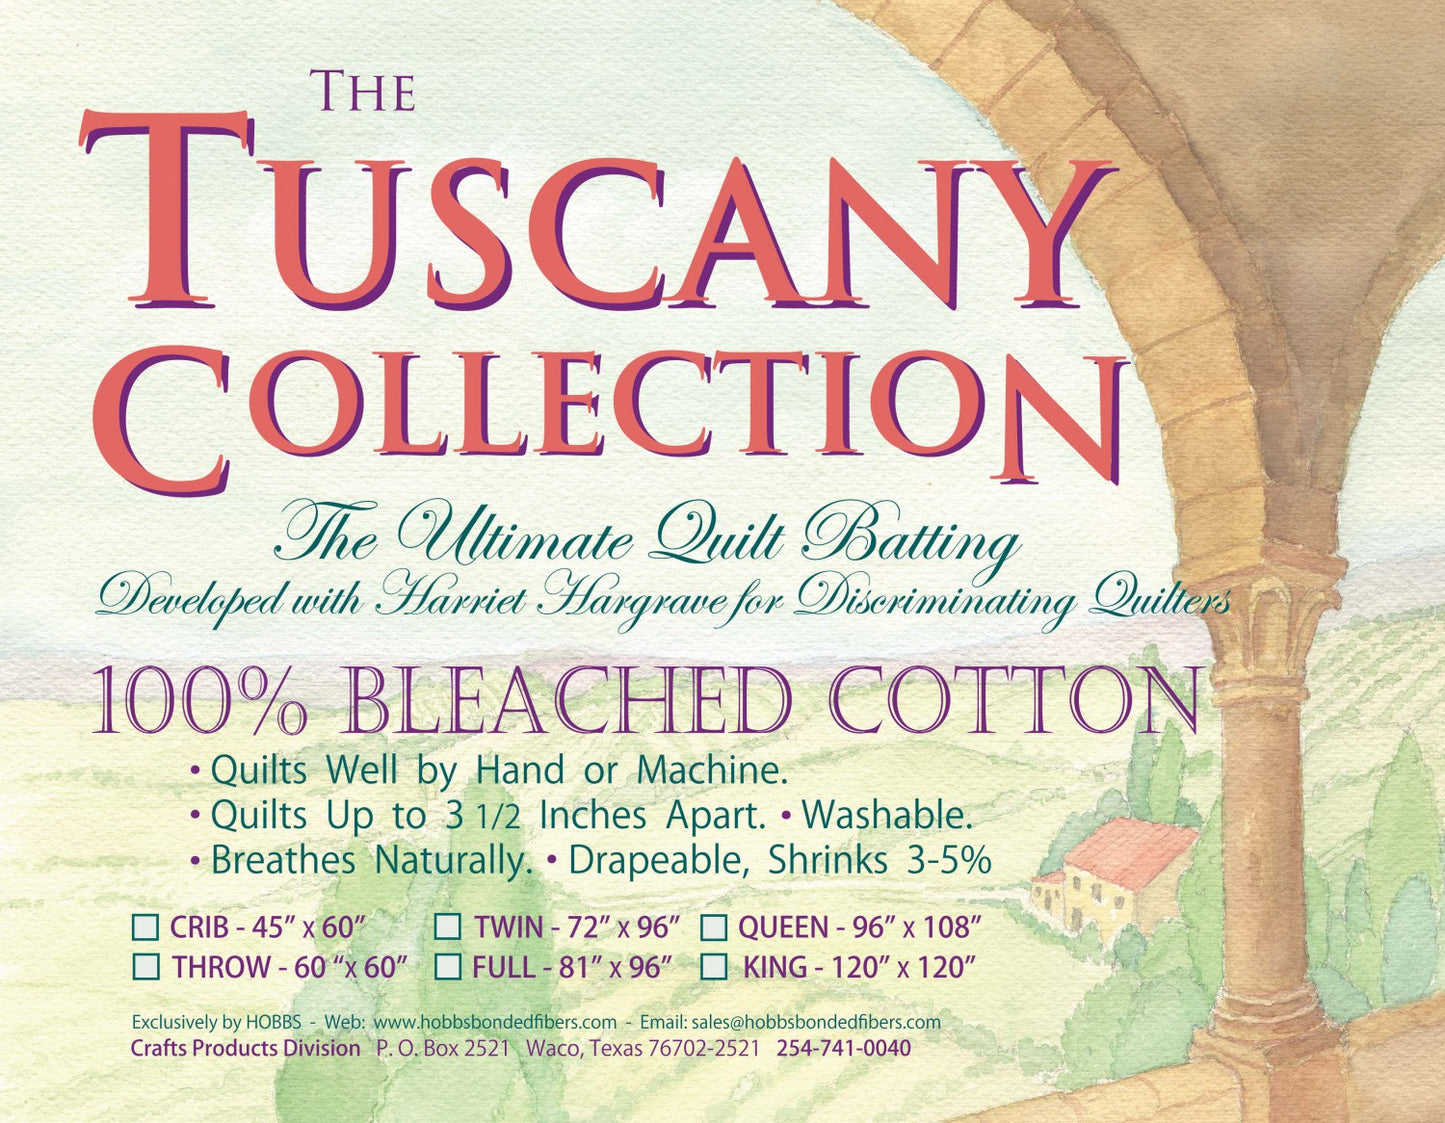 Tuscany 100% Bleached Cotton Batting Throw